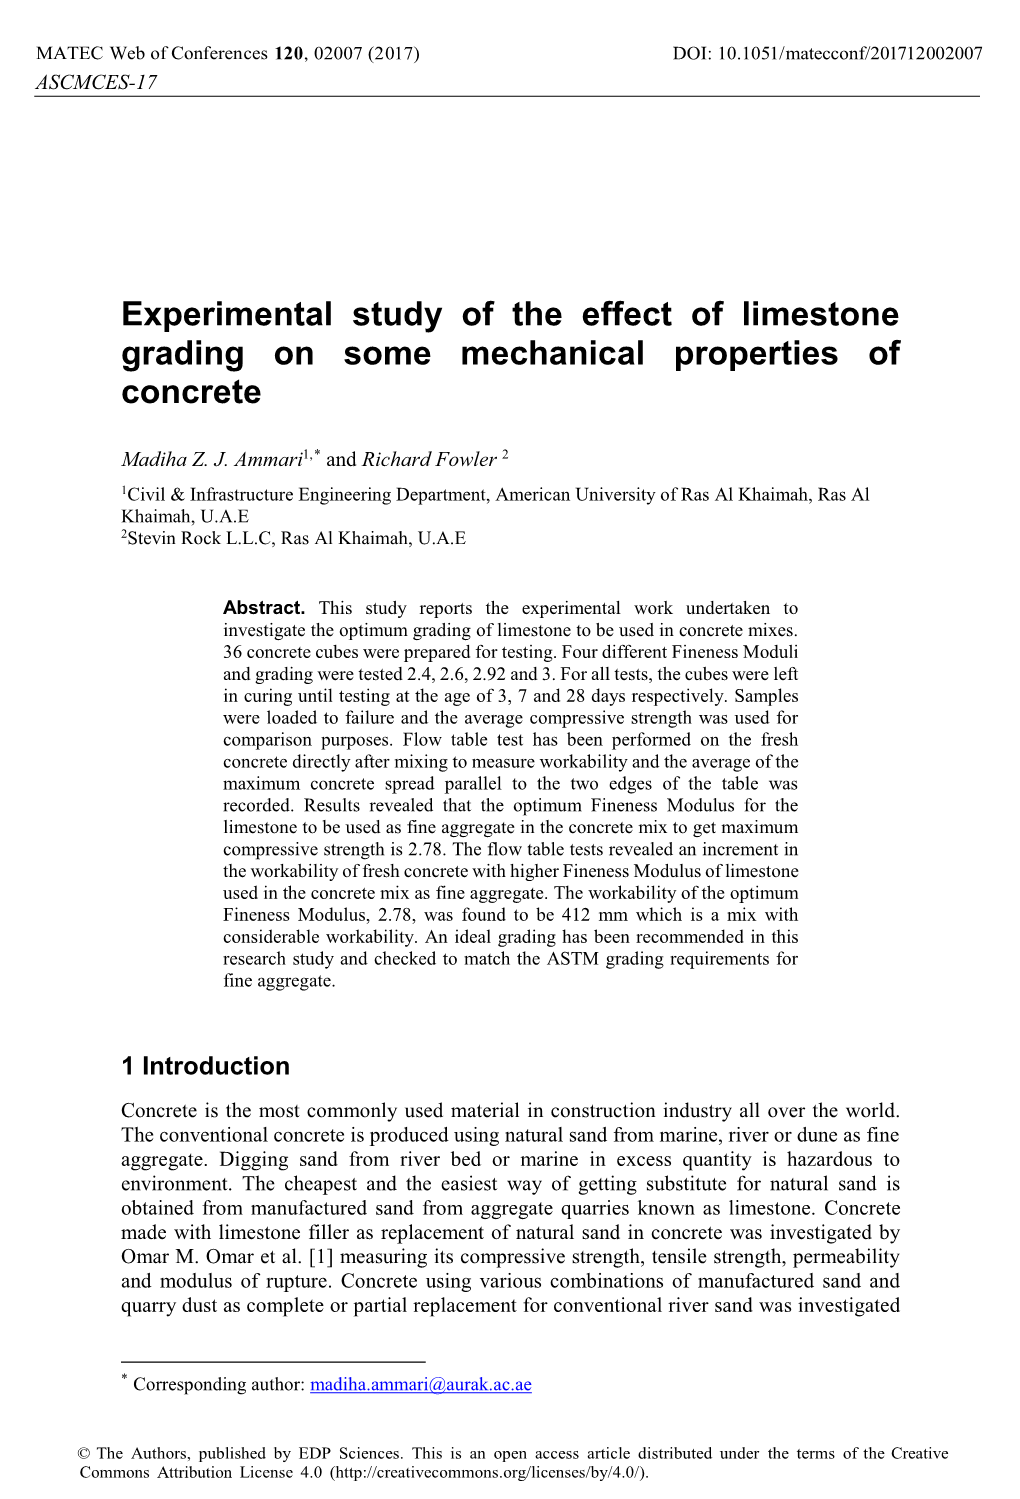 Experimental Study of the Effect of Limestone Grading on Some Mechanical Properties of Concrete